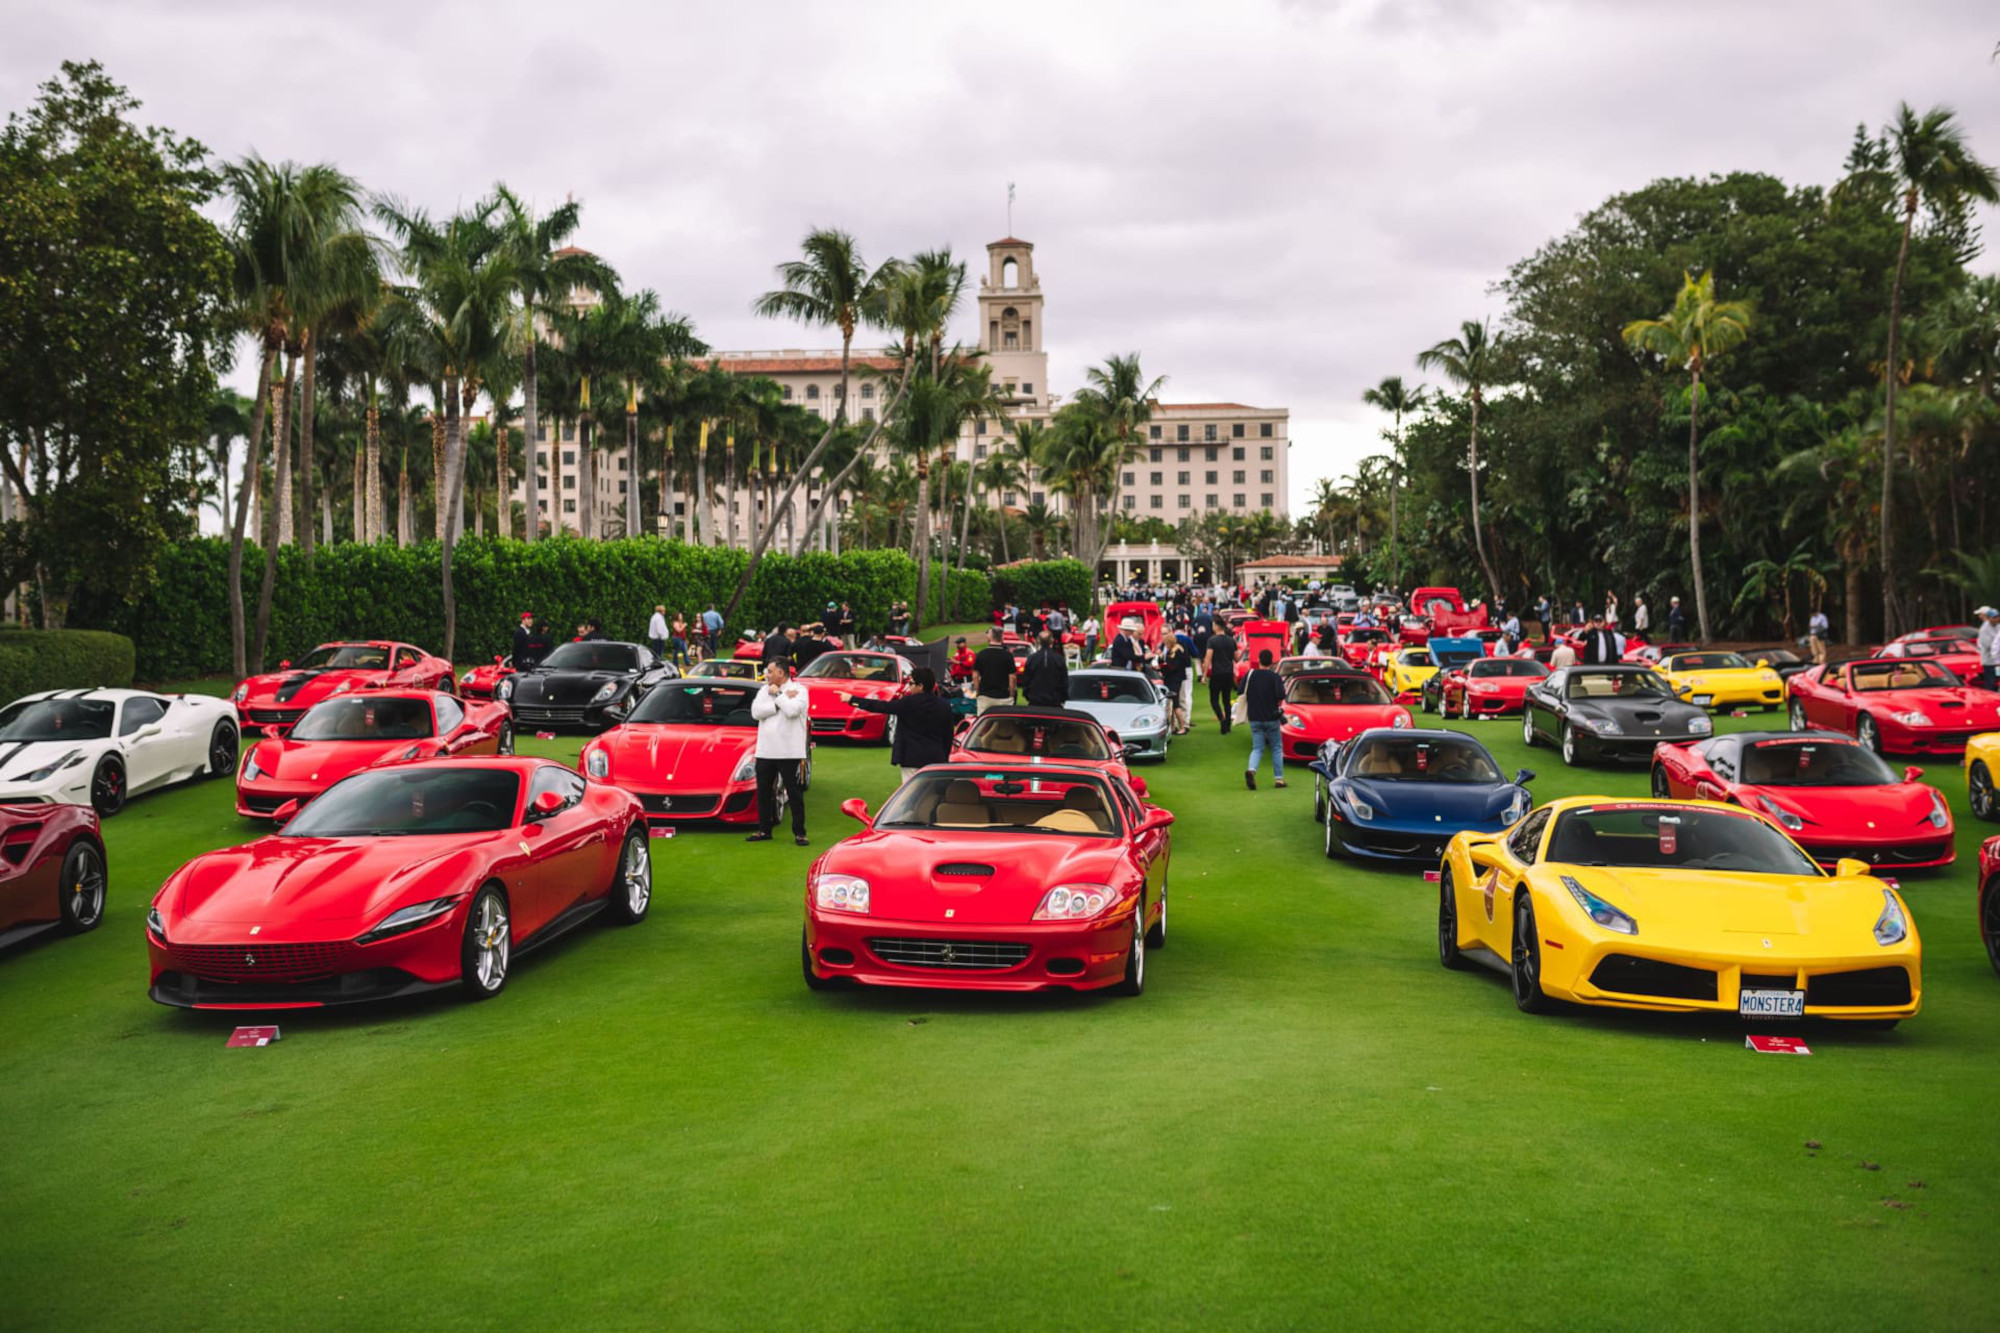 The 32nd edition of Palm Beach Cavallino Classic